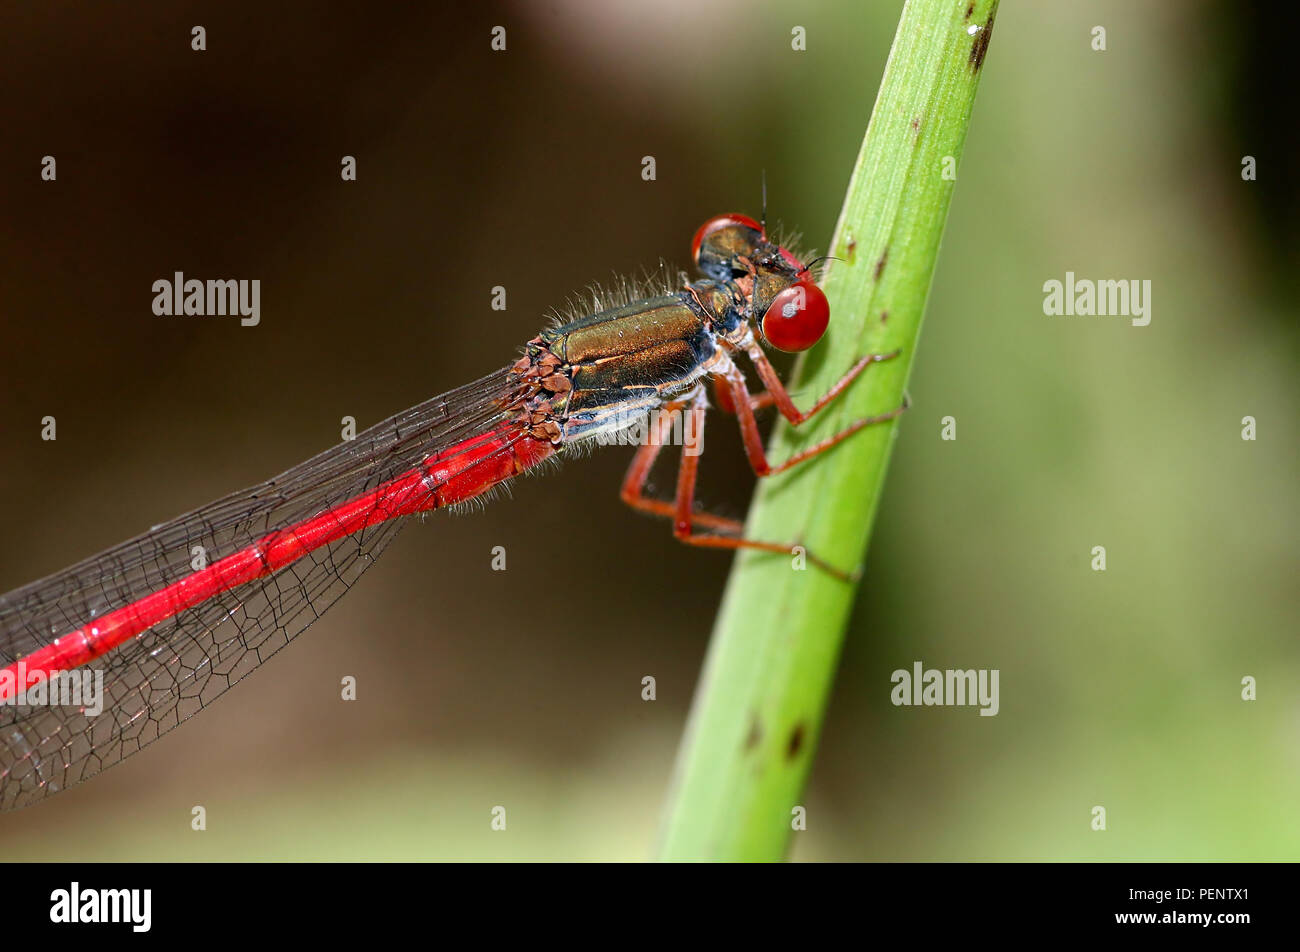 European Small Red Damselfly (Ceriagrion tenellum) Stock Photo